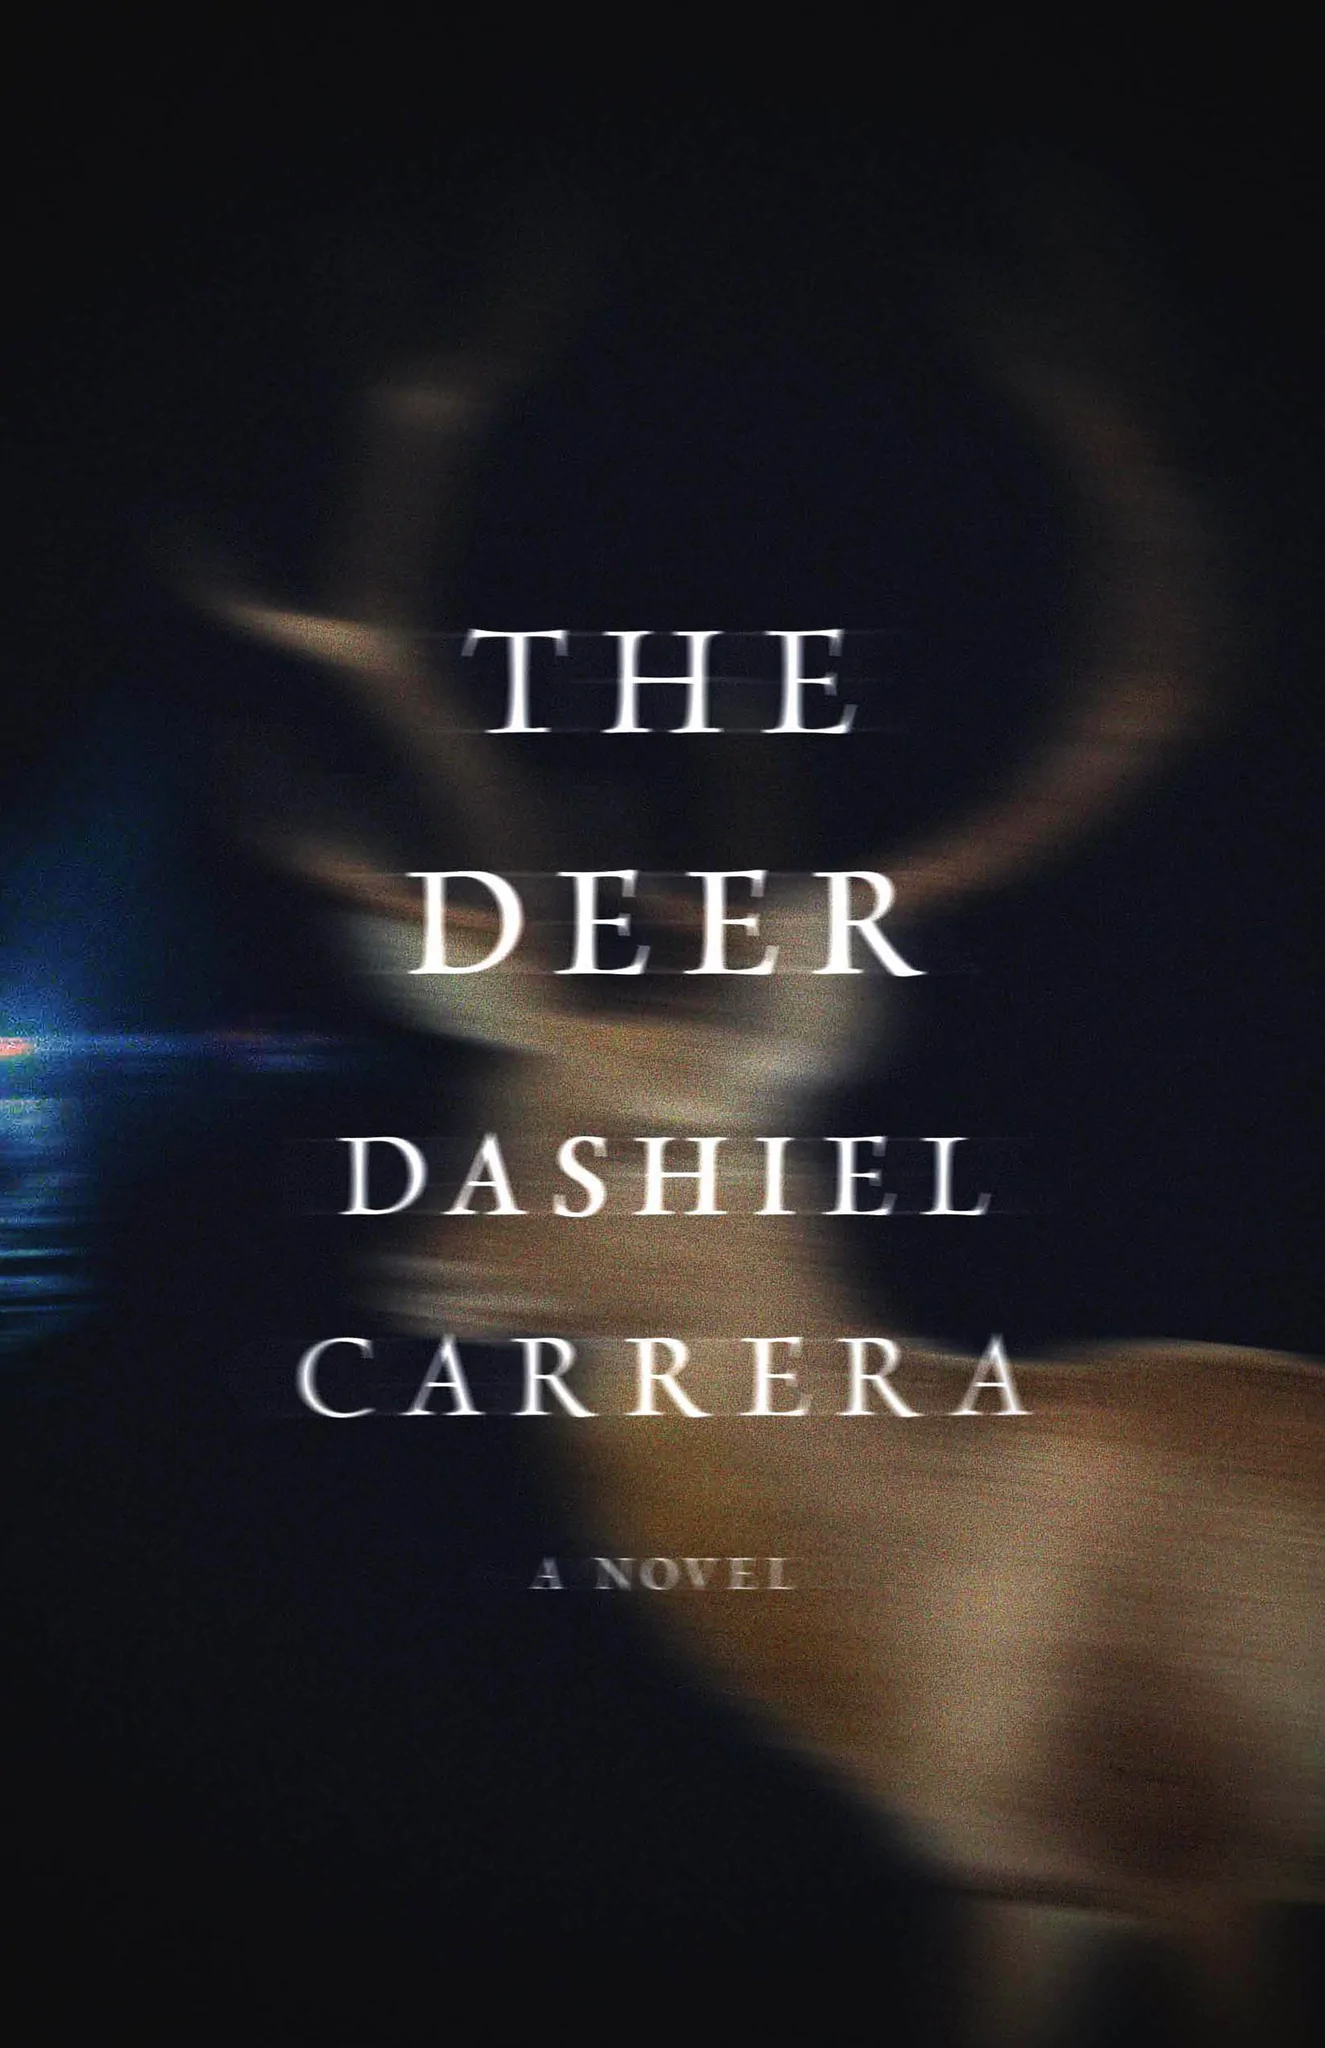 Book cover with title, "The Deer," Image of deer in headlights on cover.